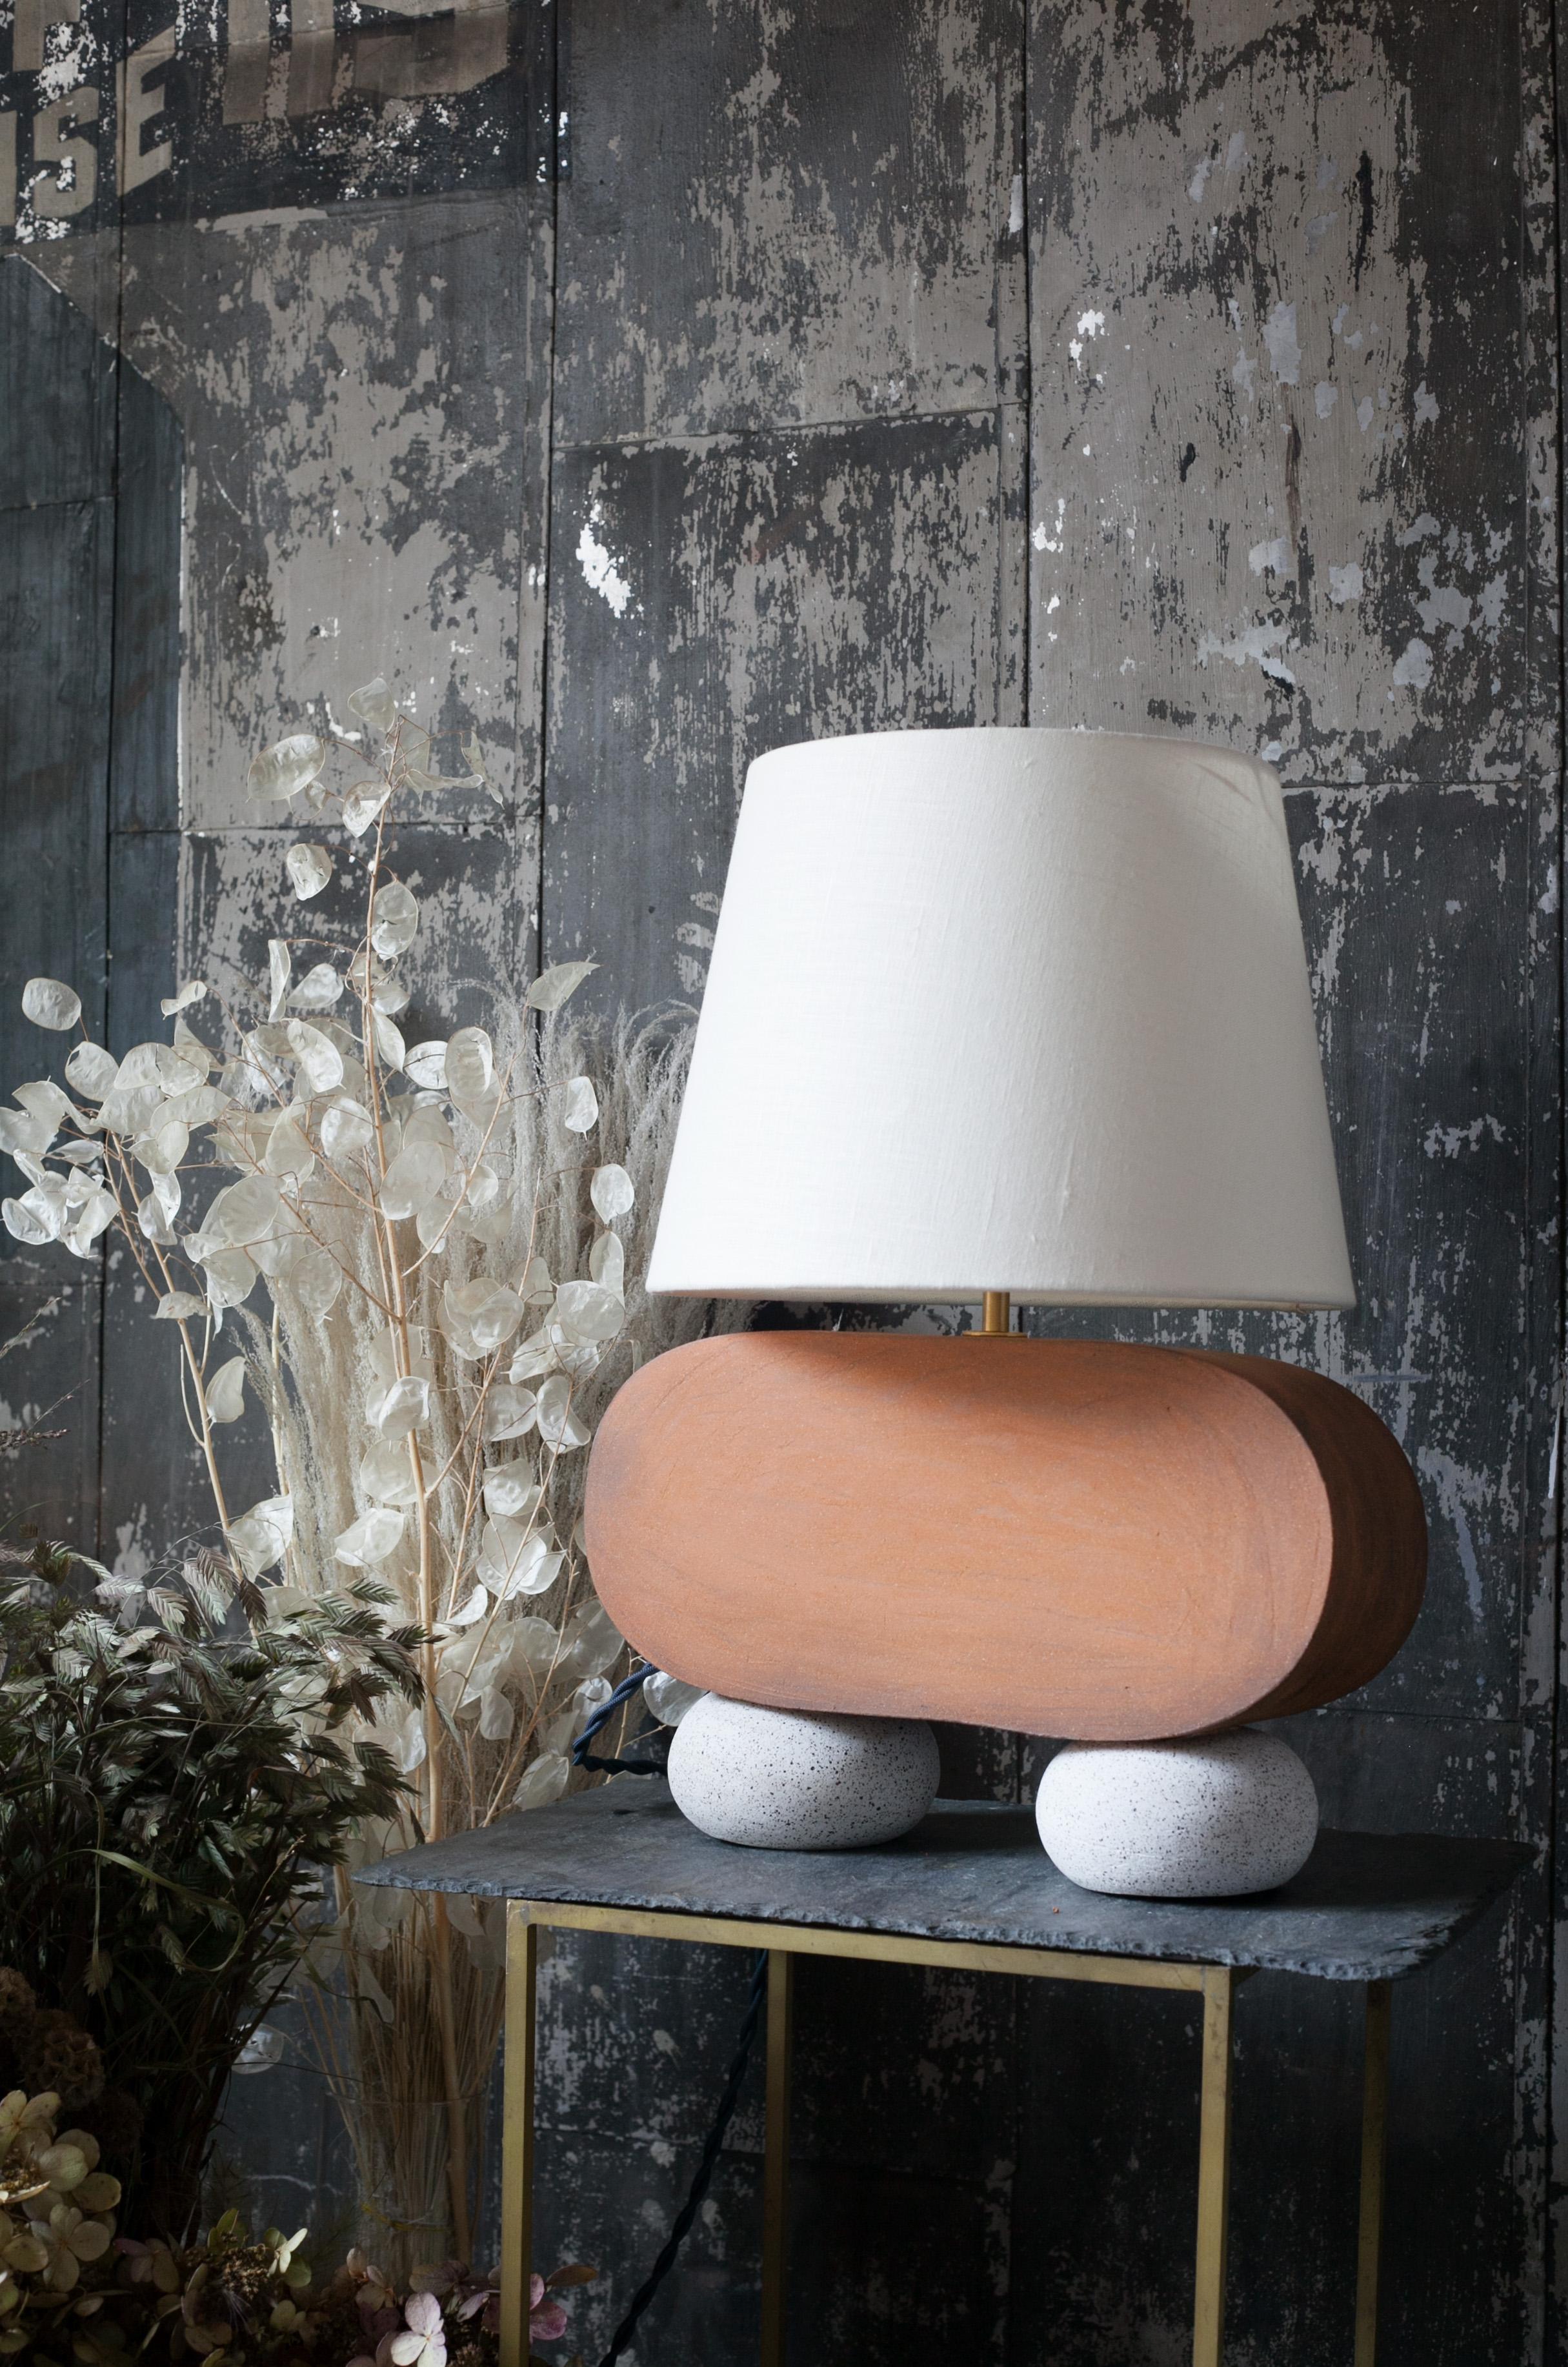 One of a kind ceramic lamp, hand built and assembled by hand. The lamp base is comprised of speckled clay manufactured regionally to the East Coast with custom made matte finish white glaze. This piece was inspired by seashells and smooth stones